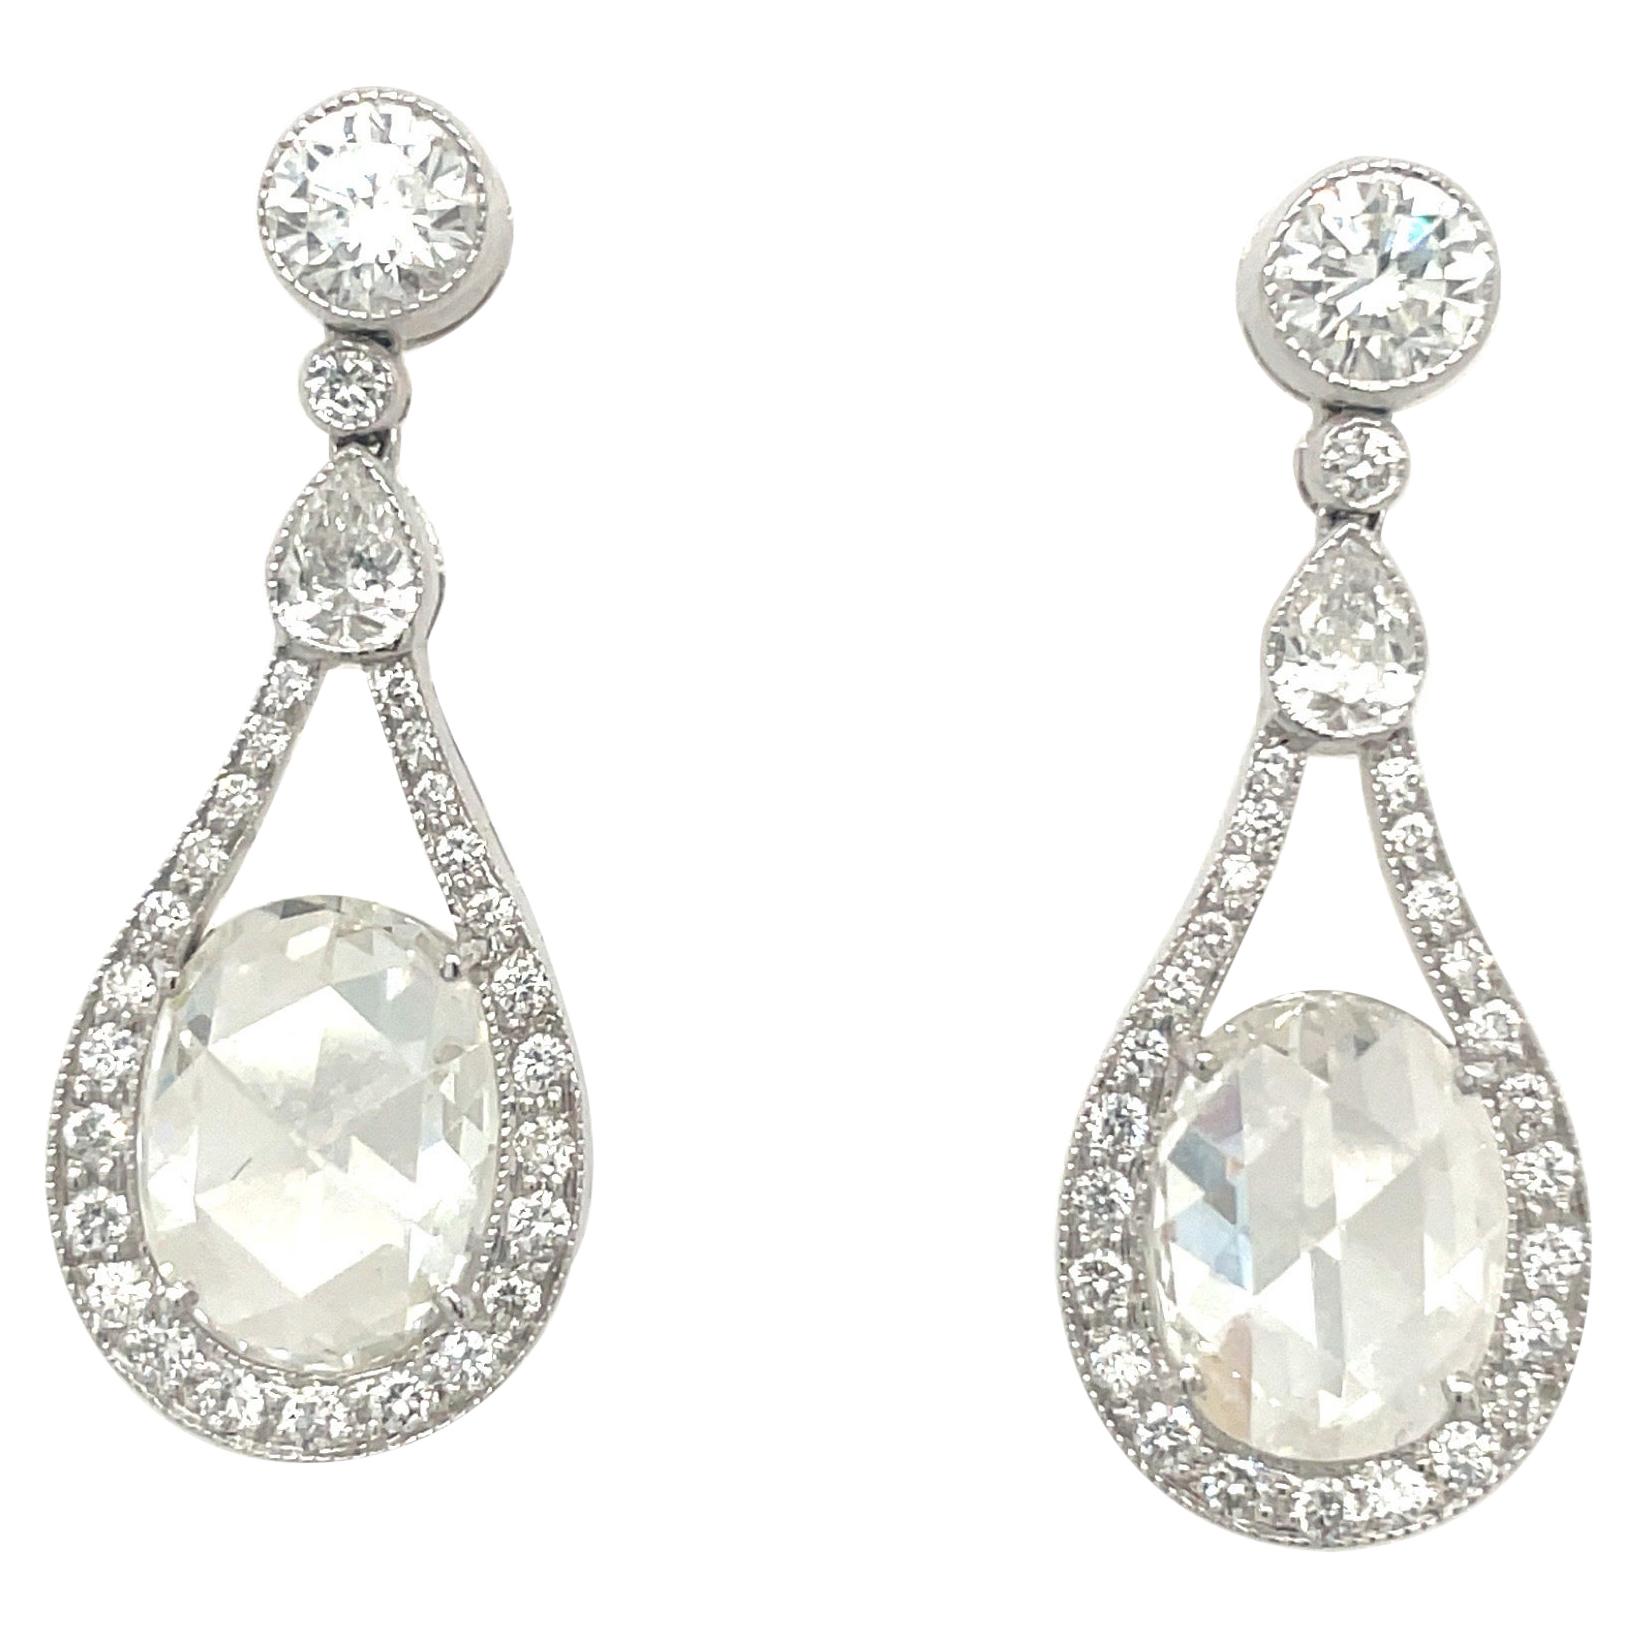 Cellini Jewelers NYC Plat. 4.02Ct. Rose and Full Cut Diamond Drop Earrings For Sale